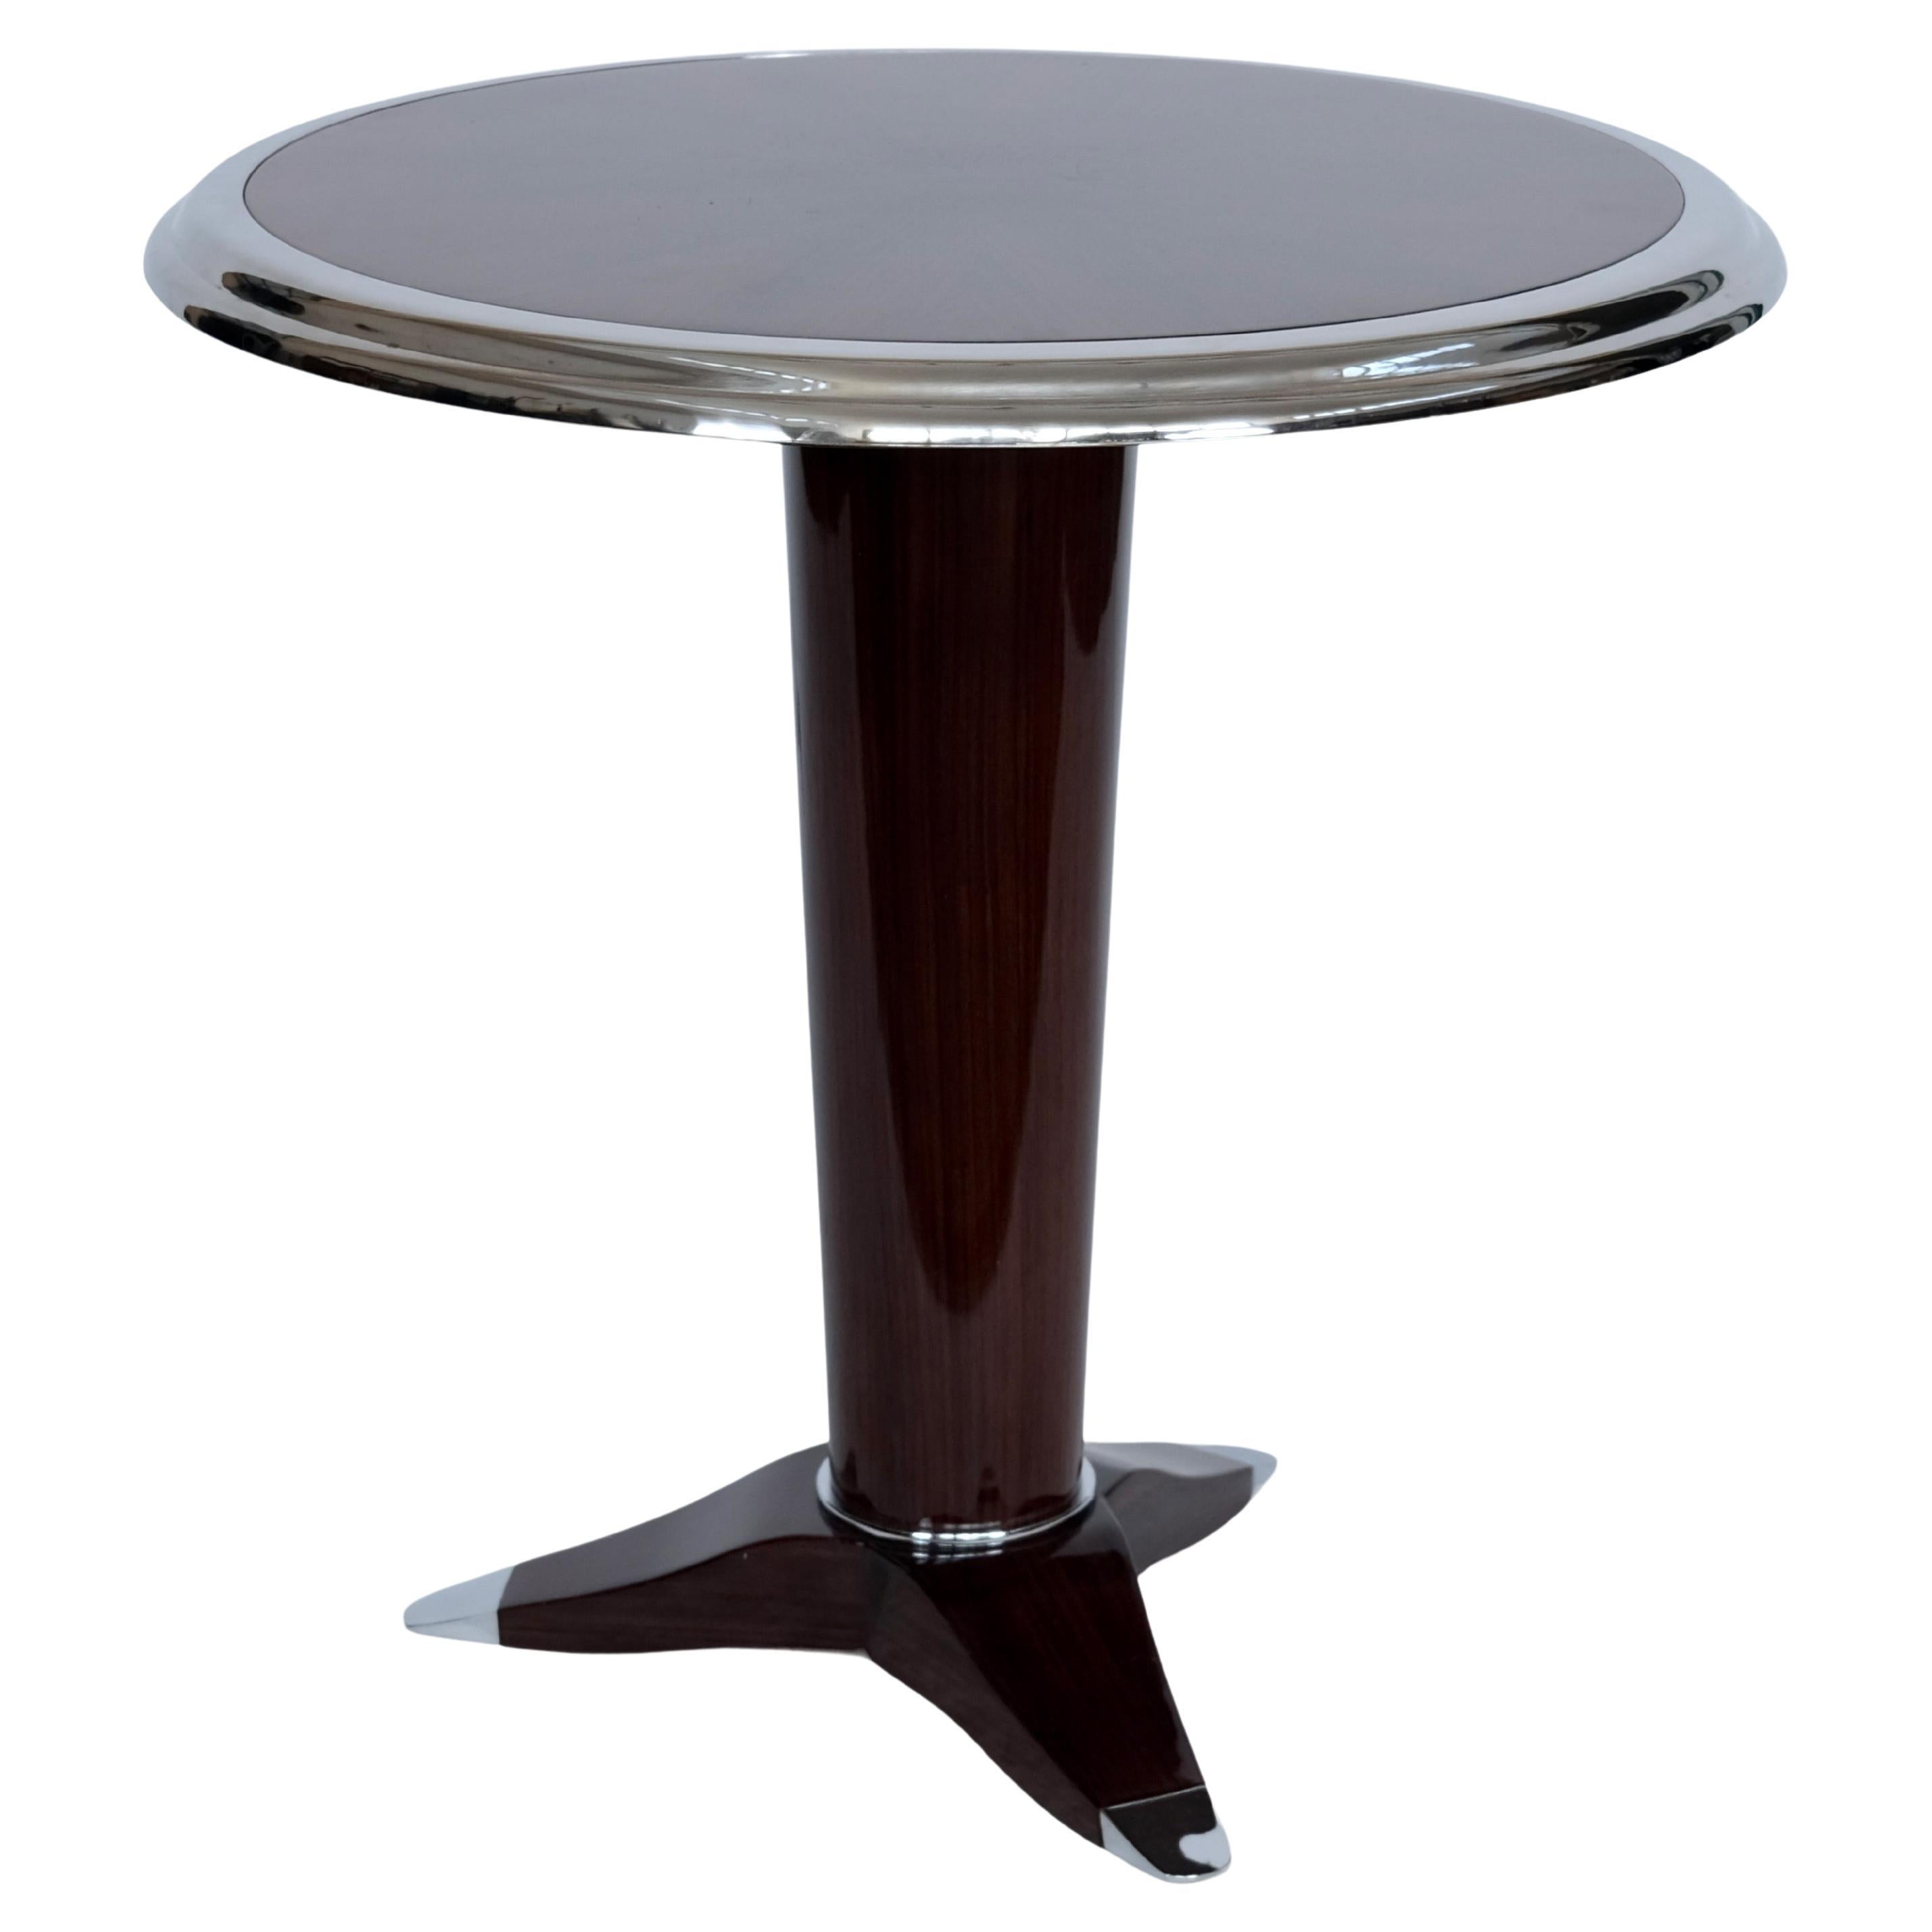 Round Art Deco Style Side Table in Lacquered Mahogany and Chrome For Sale